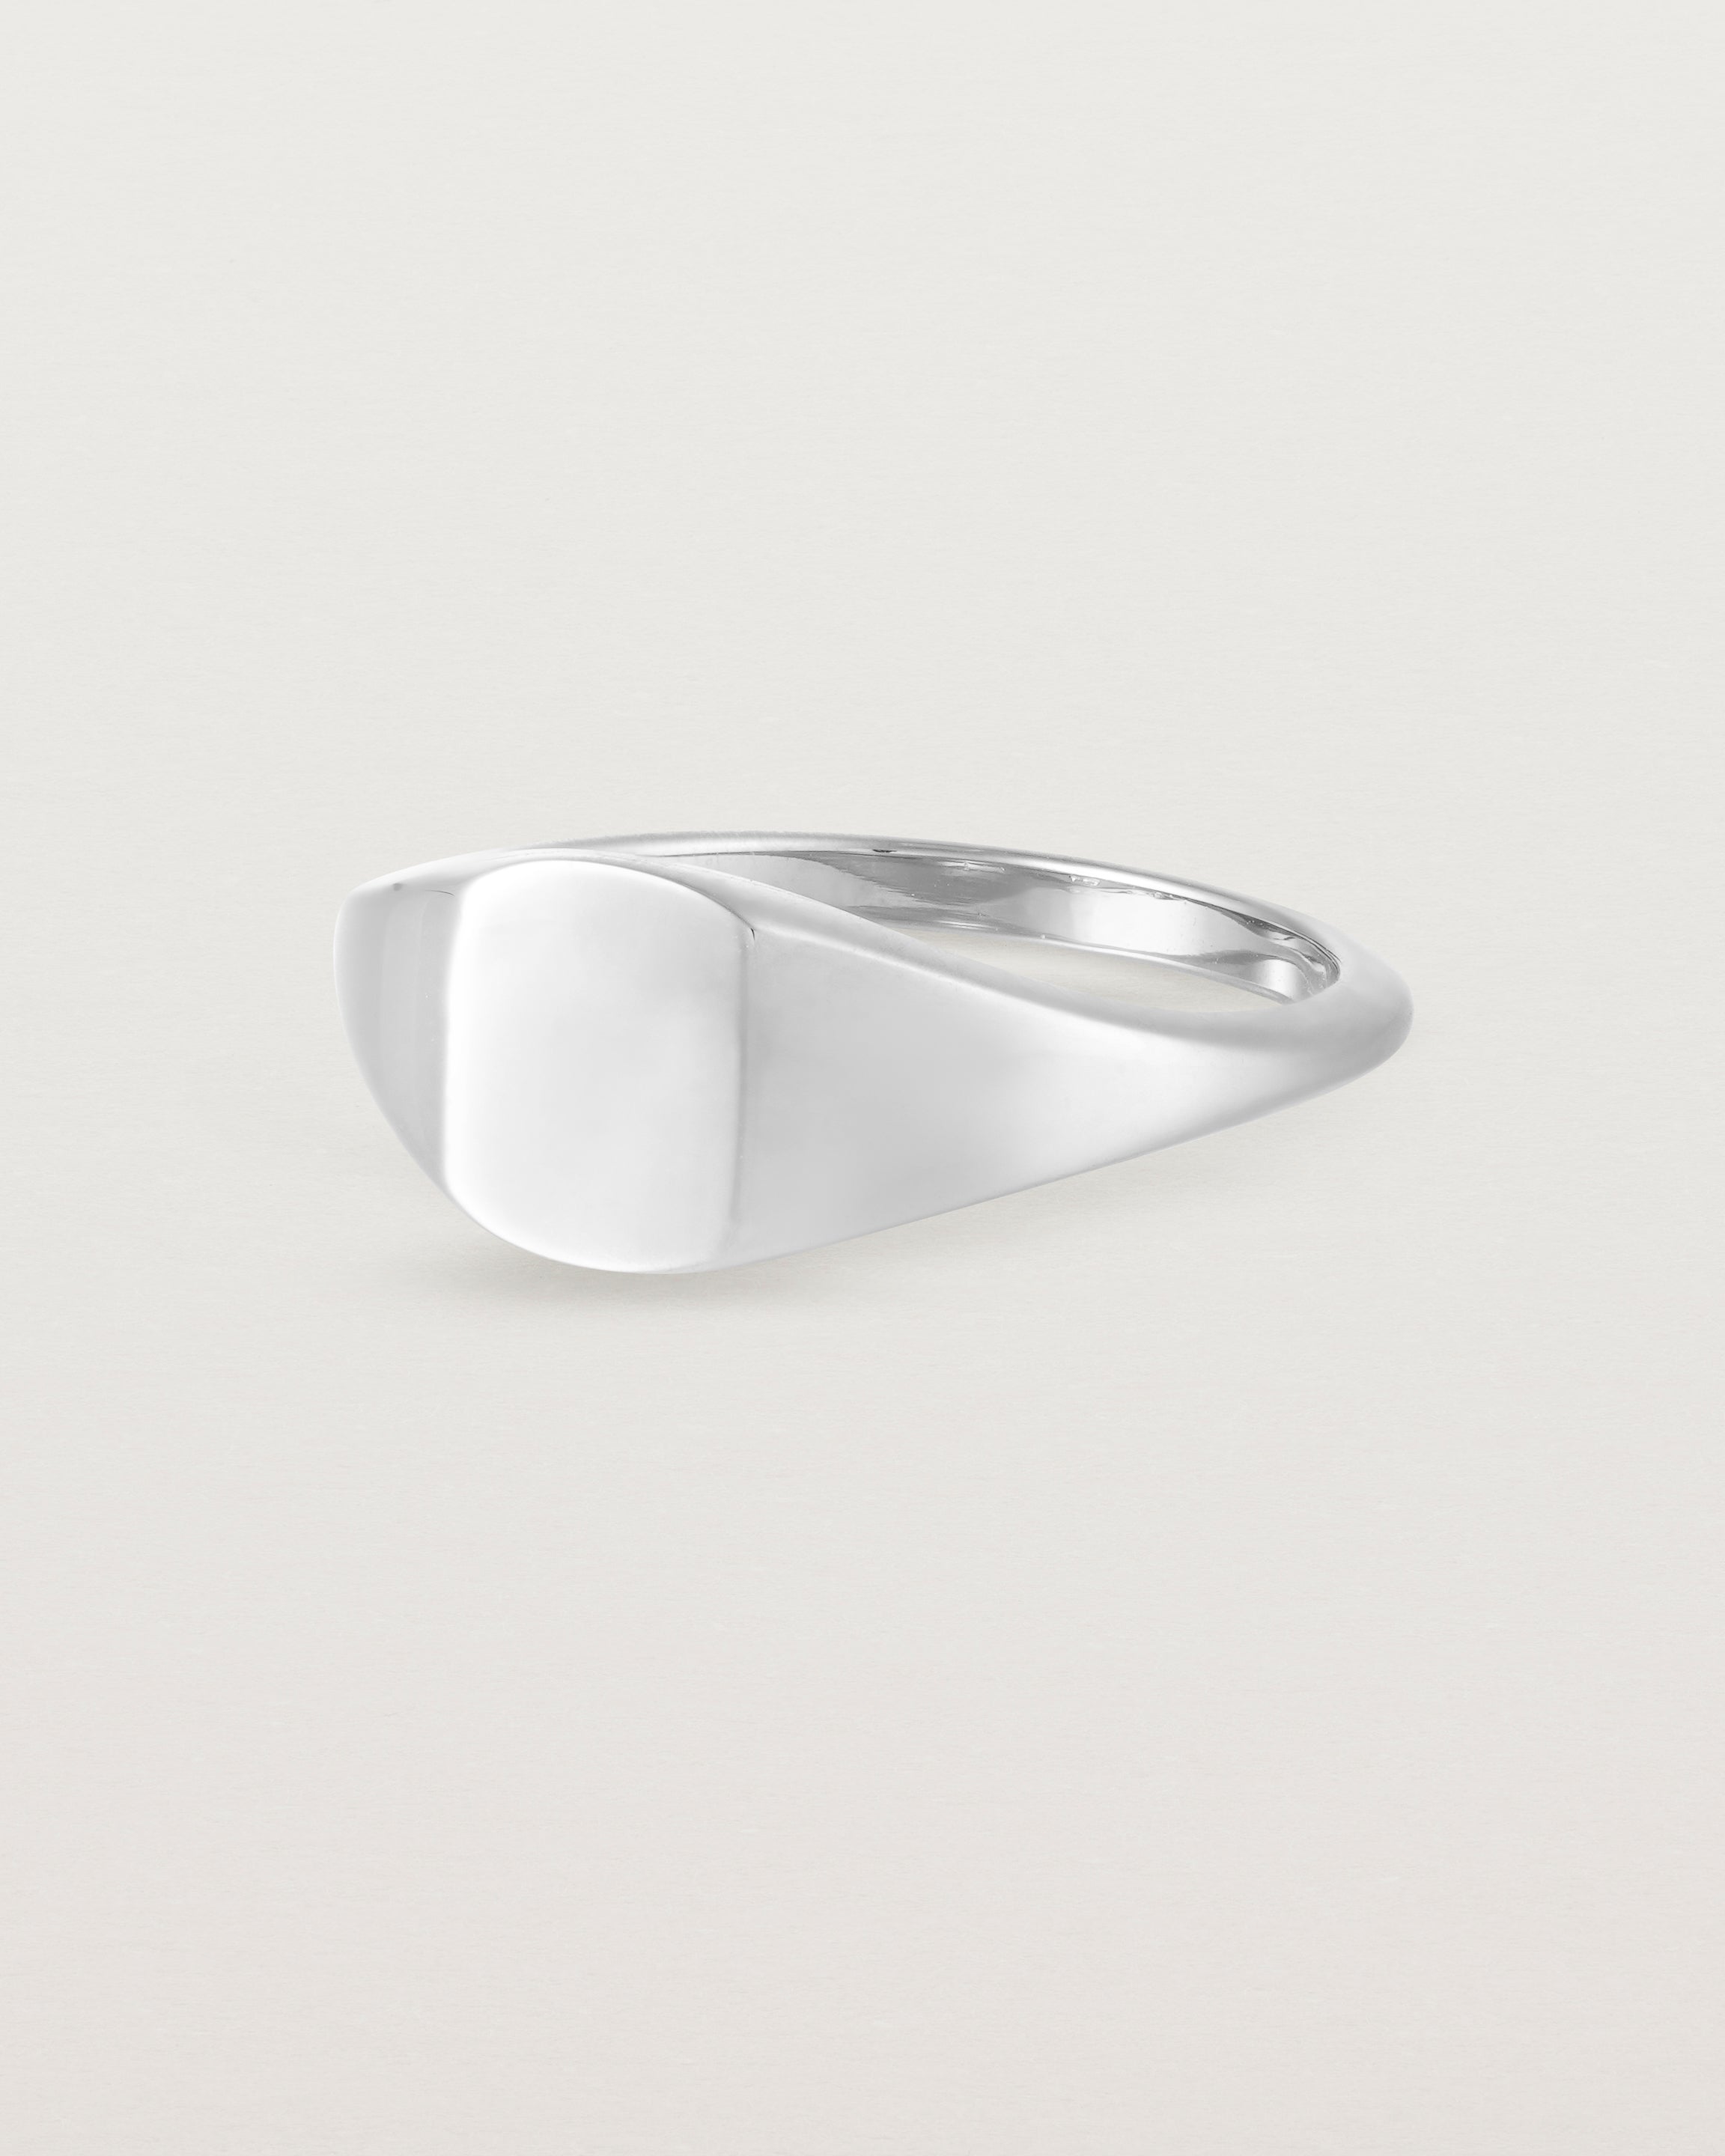 Angled view of a simple signet with an elongated rectangular face in sterling silver.